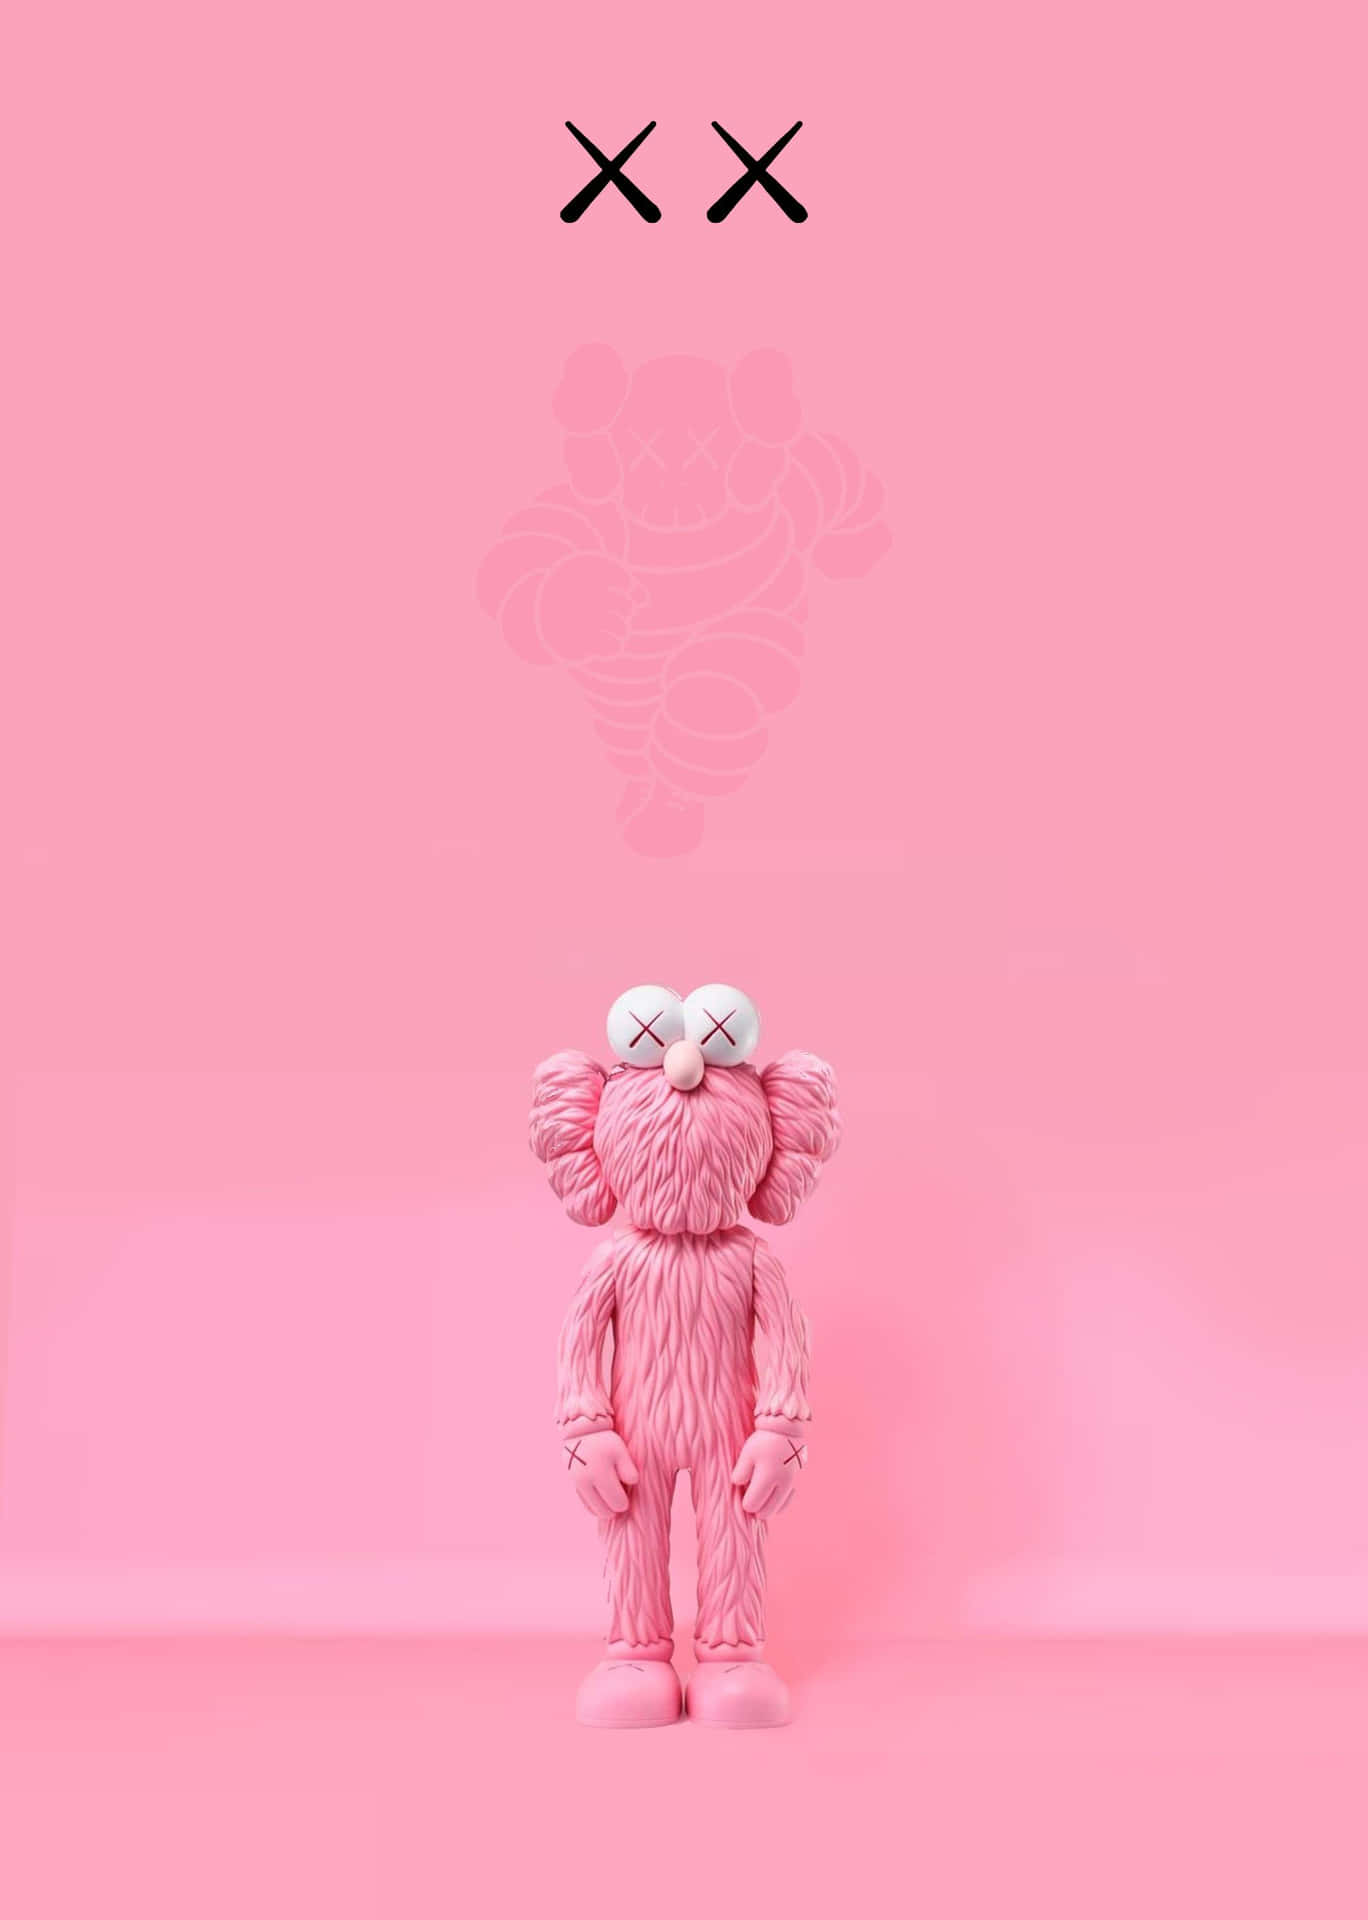 Kaws BFF Pink Companion Limited Edition Sculpture Wallpaper